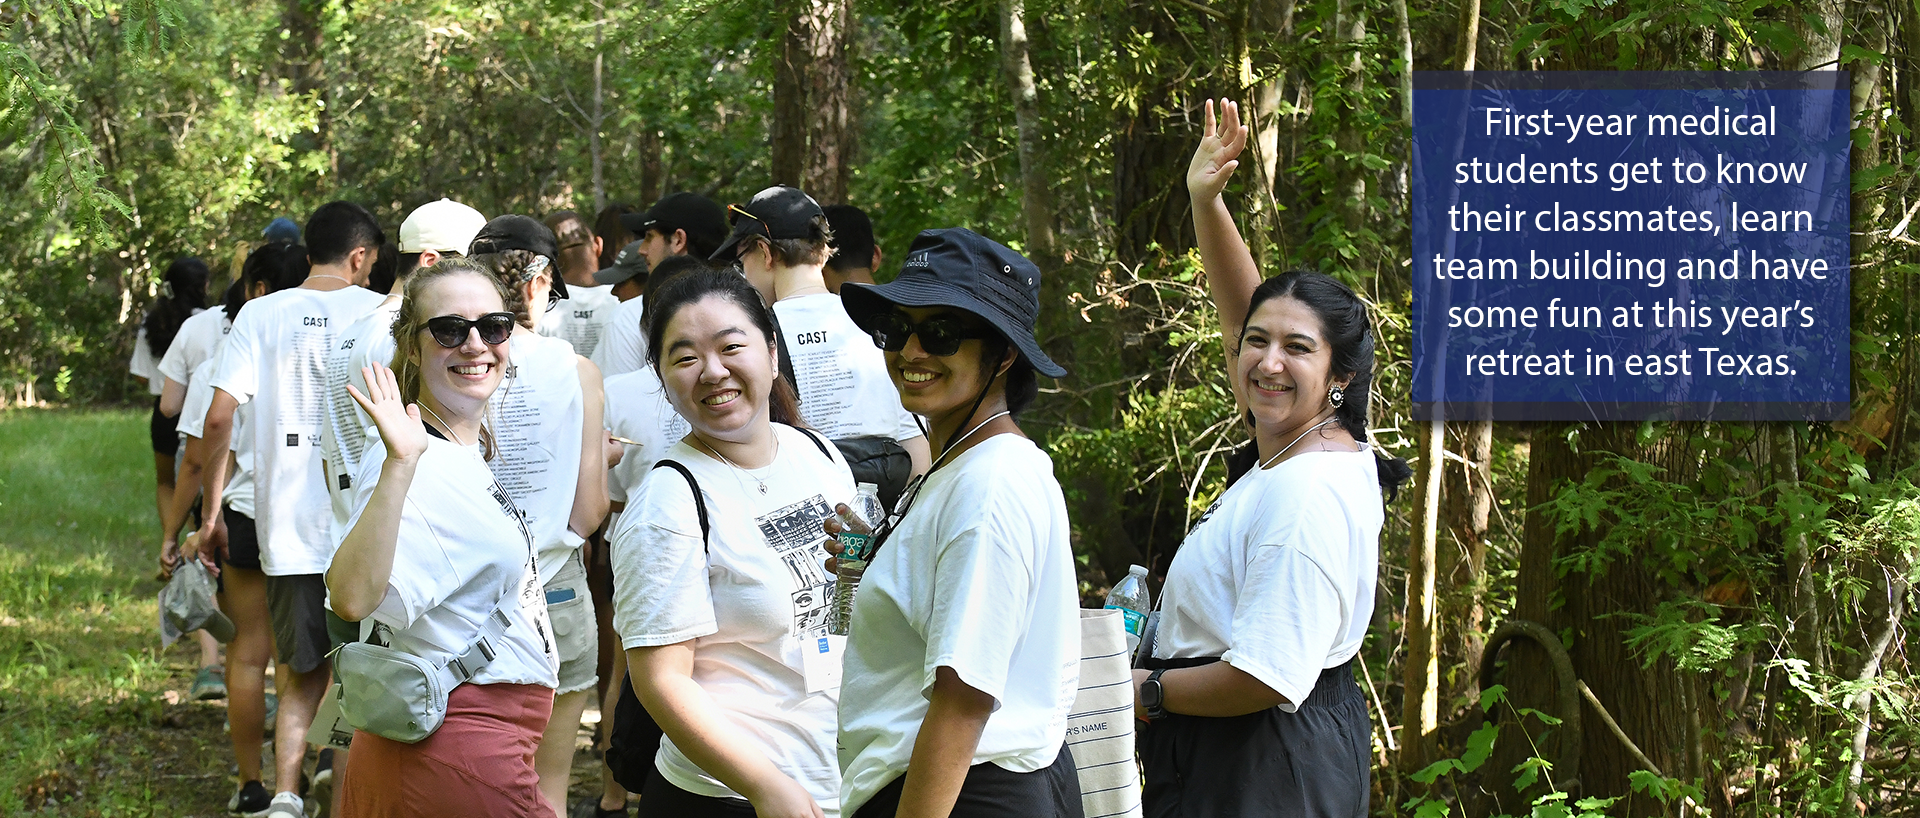 First-year medical students get to know their classmates, learn team building and have some fun at this year's retreat in east Texas